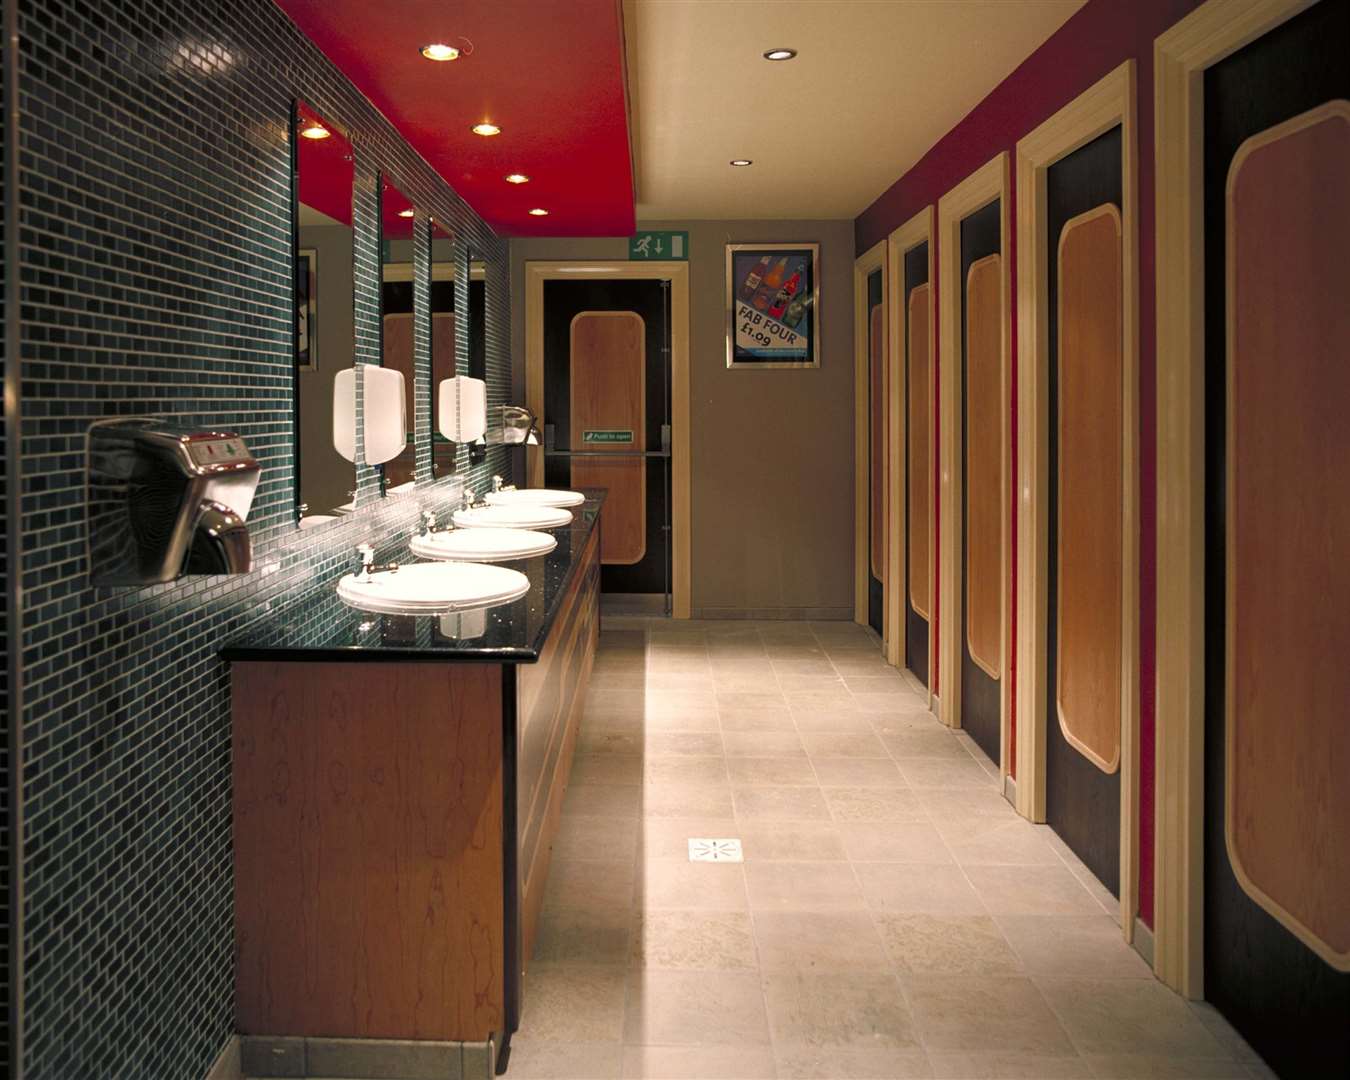 Toilets in The King's Highway pub.